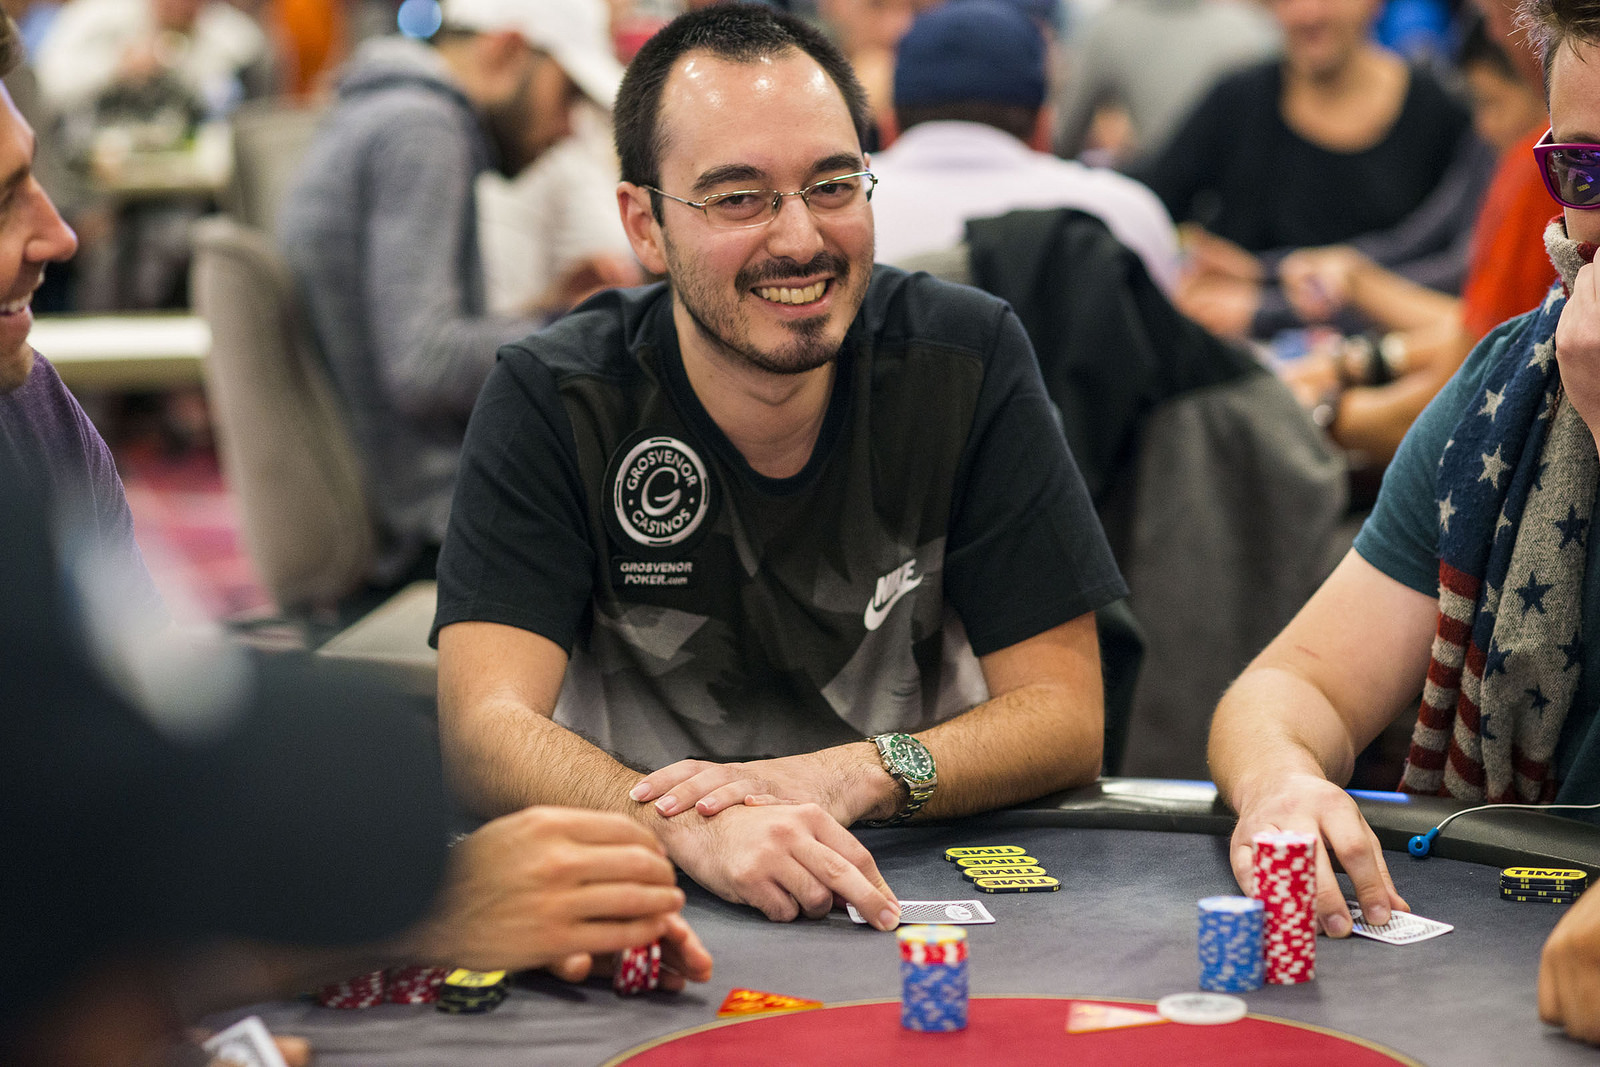 Drunk Like a Boss? Intoxicated William Kassouf Steals Chips, Loses Grosvenor Sponsorship